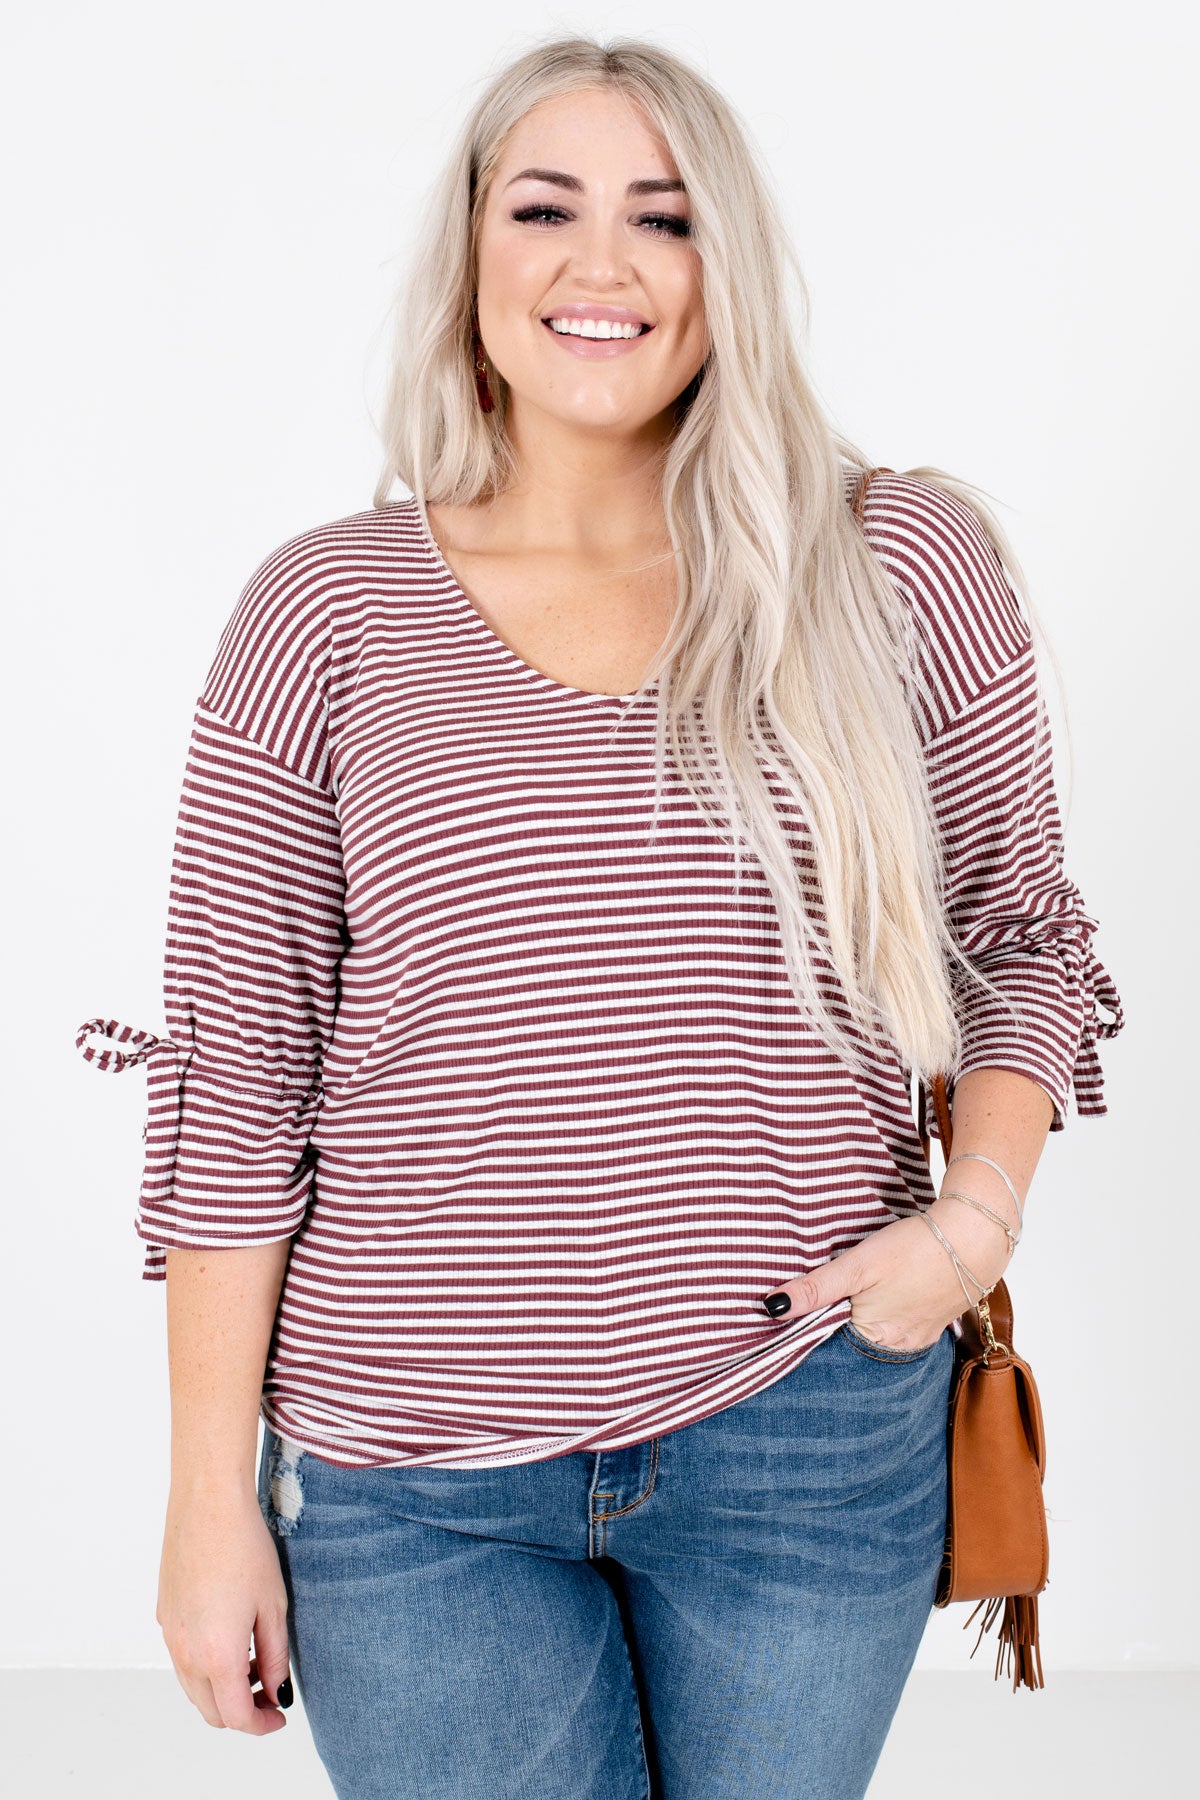 Mauve and Gray Striped Pattern Boutique Tops for Women